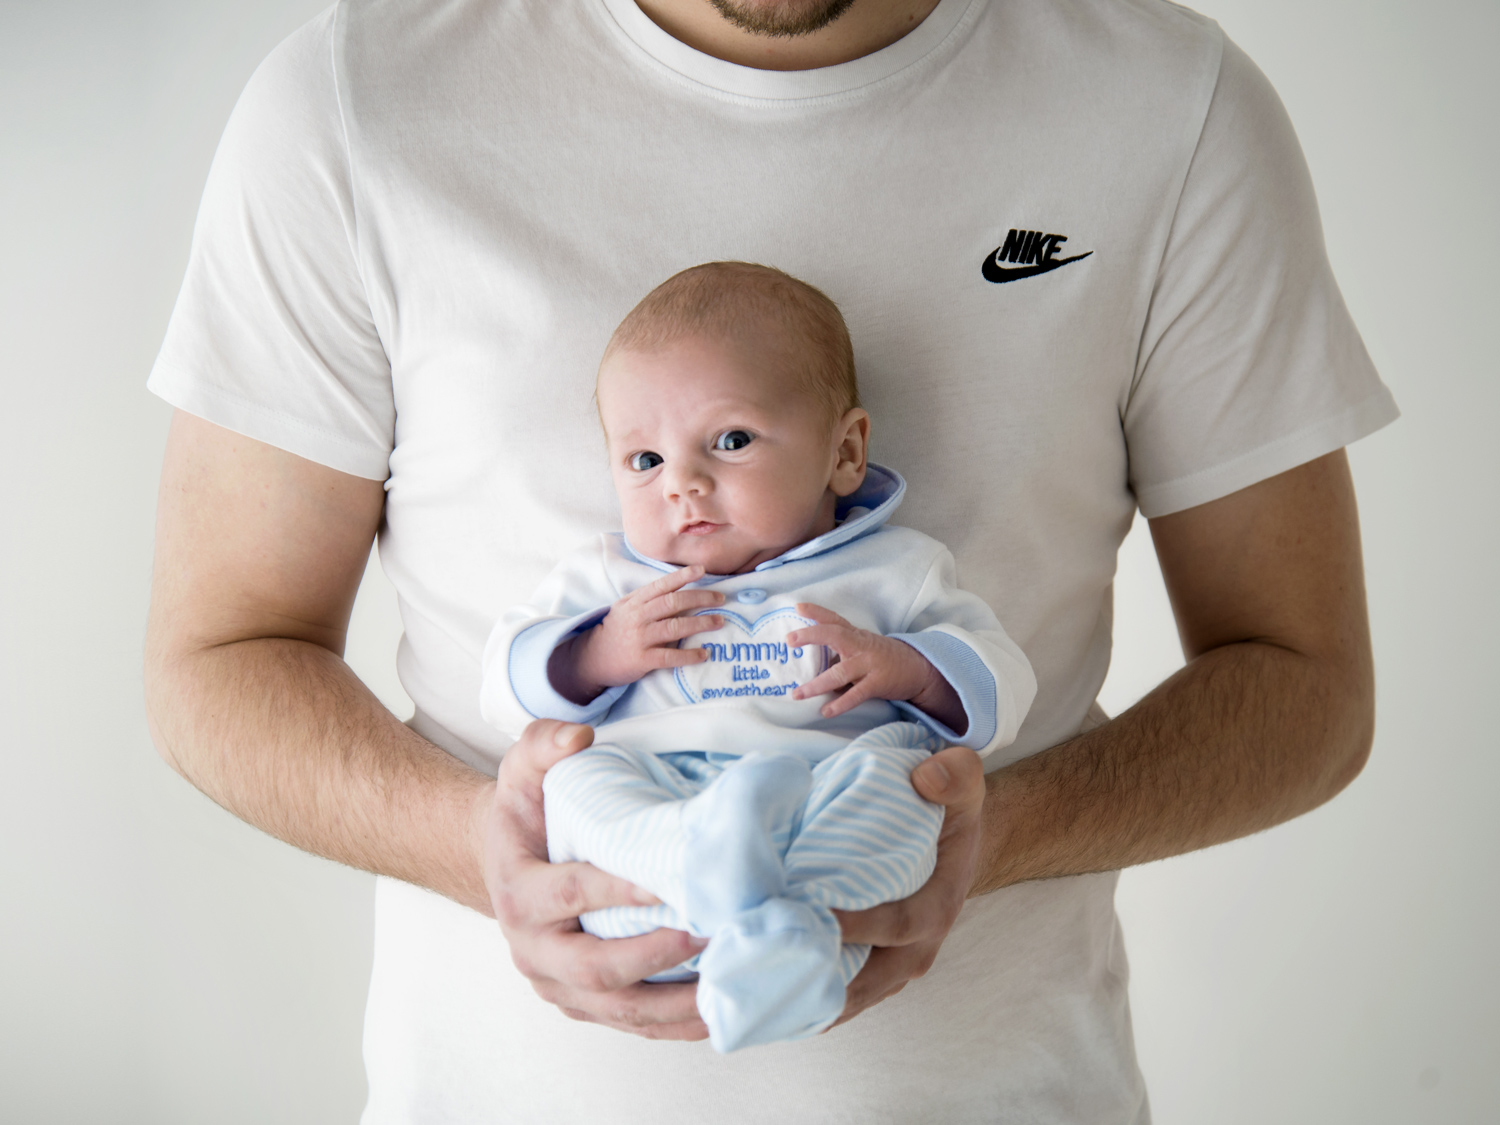 newborn baby held by father